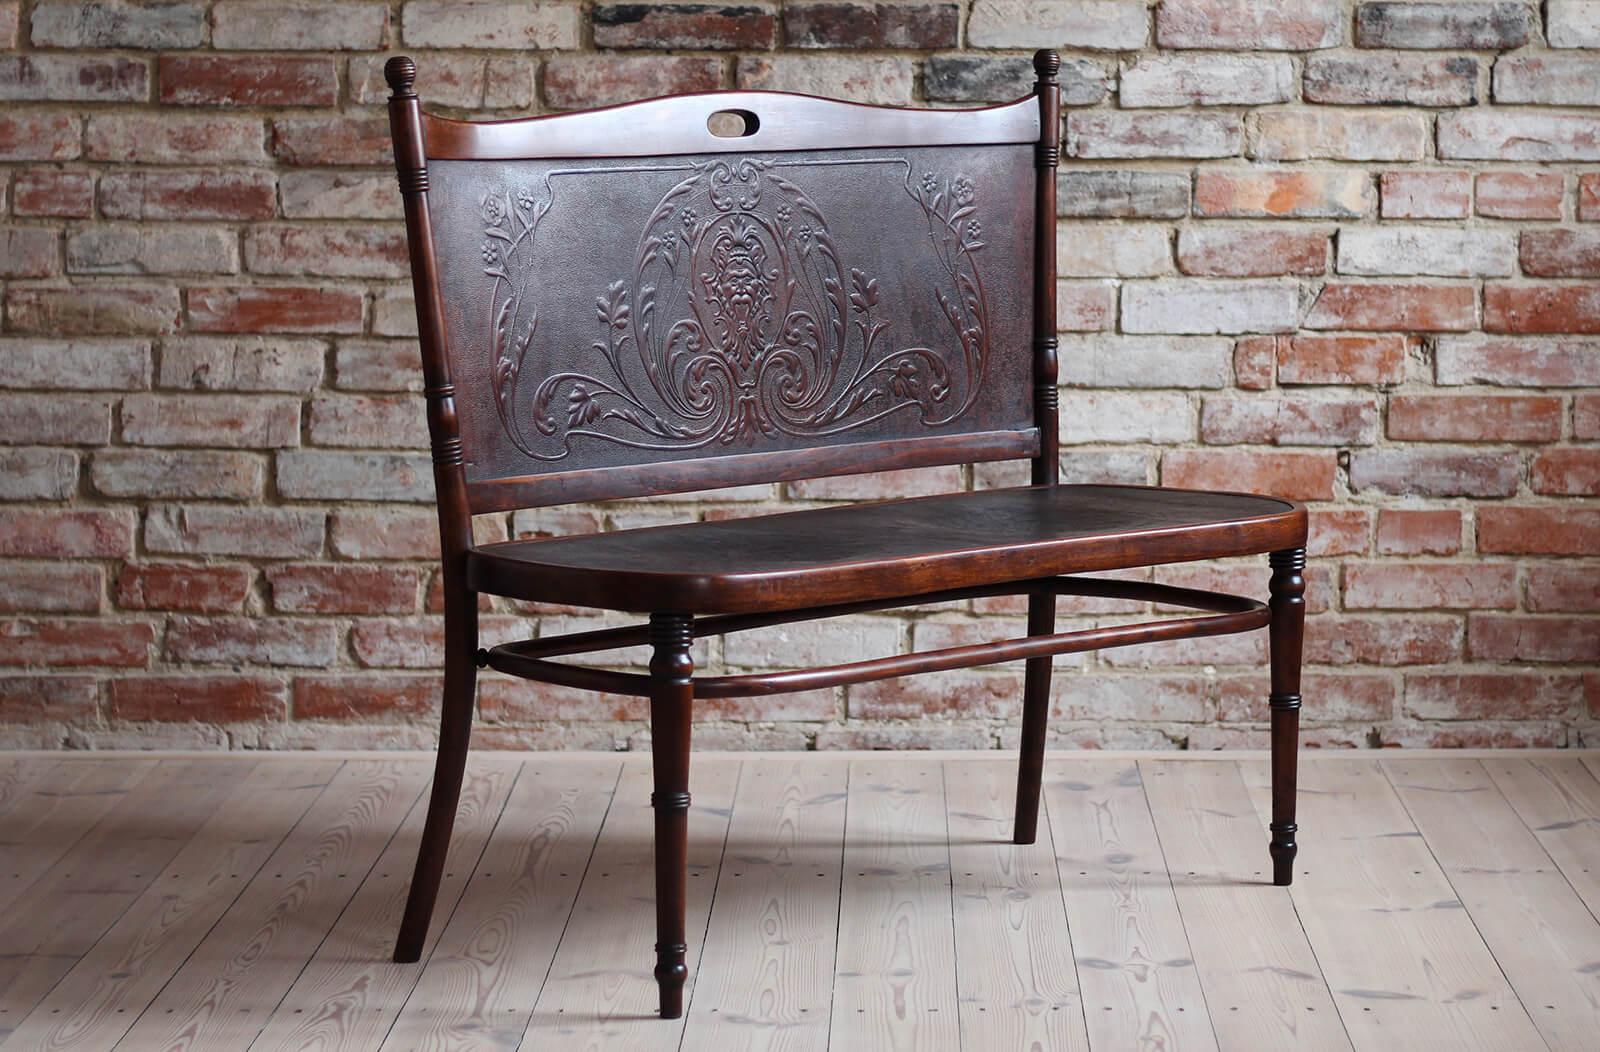 European Antique Bentwood Bench Attributed to Jacob and Josef Kohn, Early 20th Century For Sale